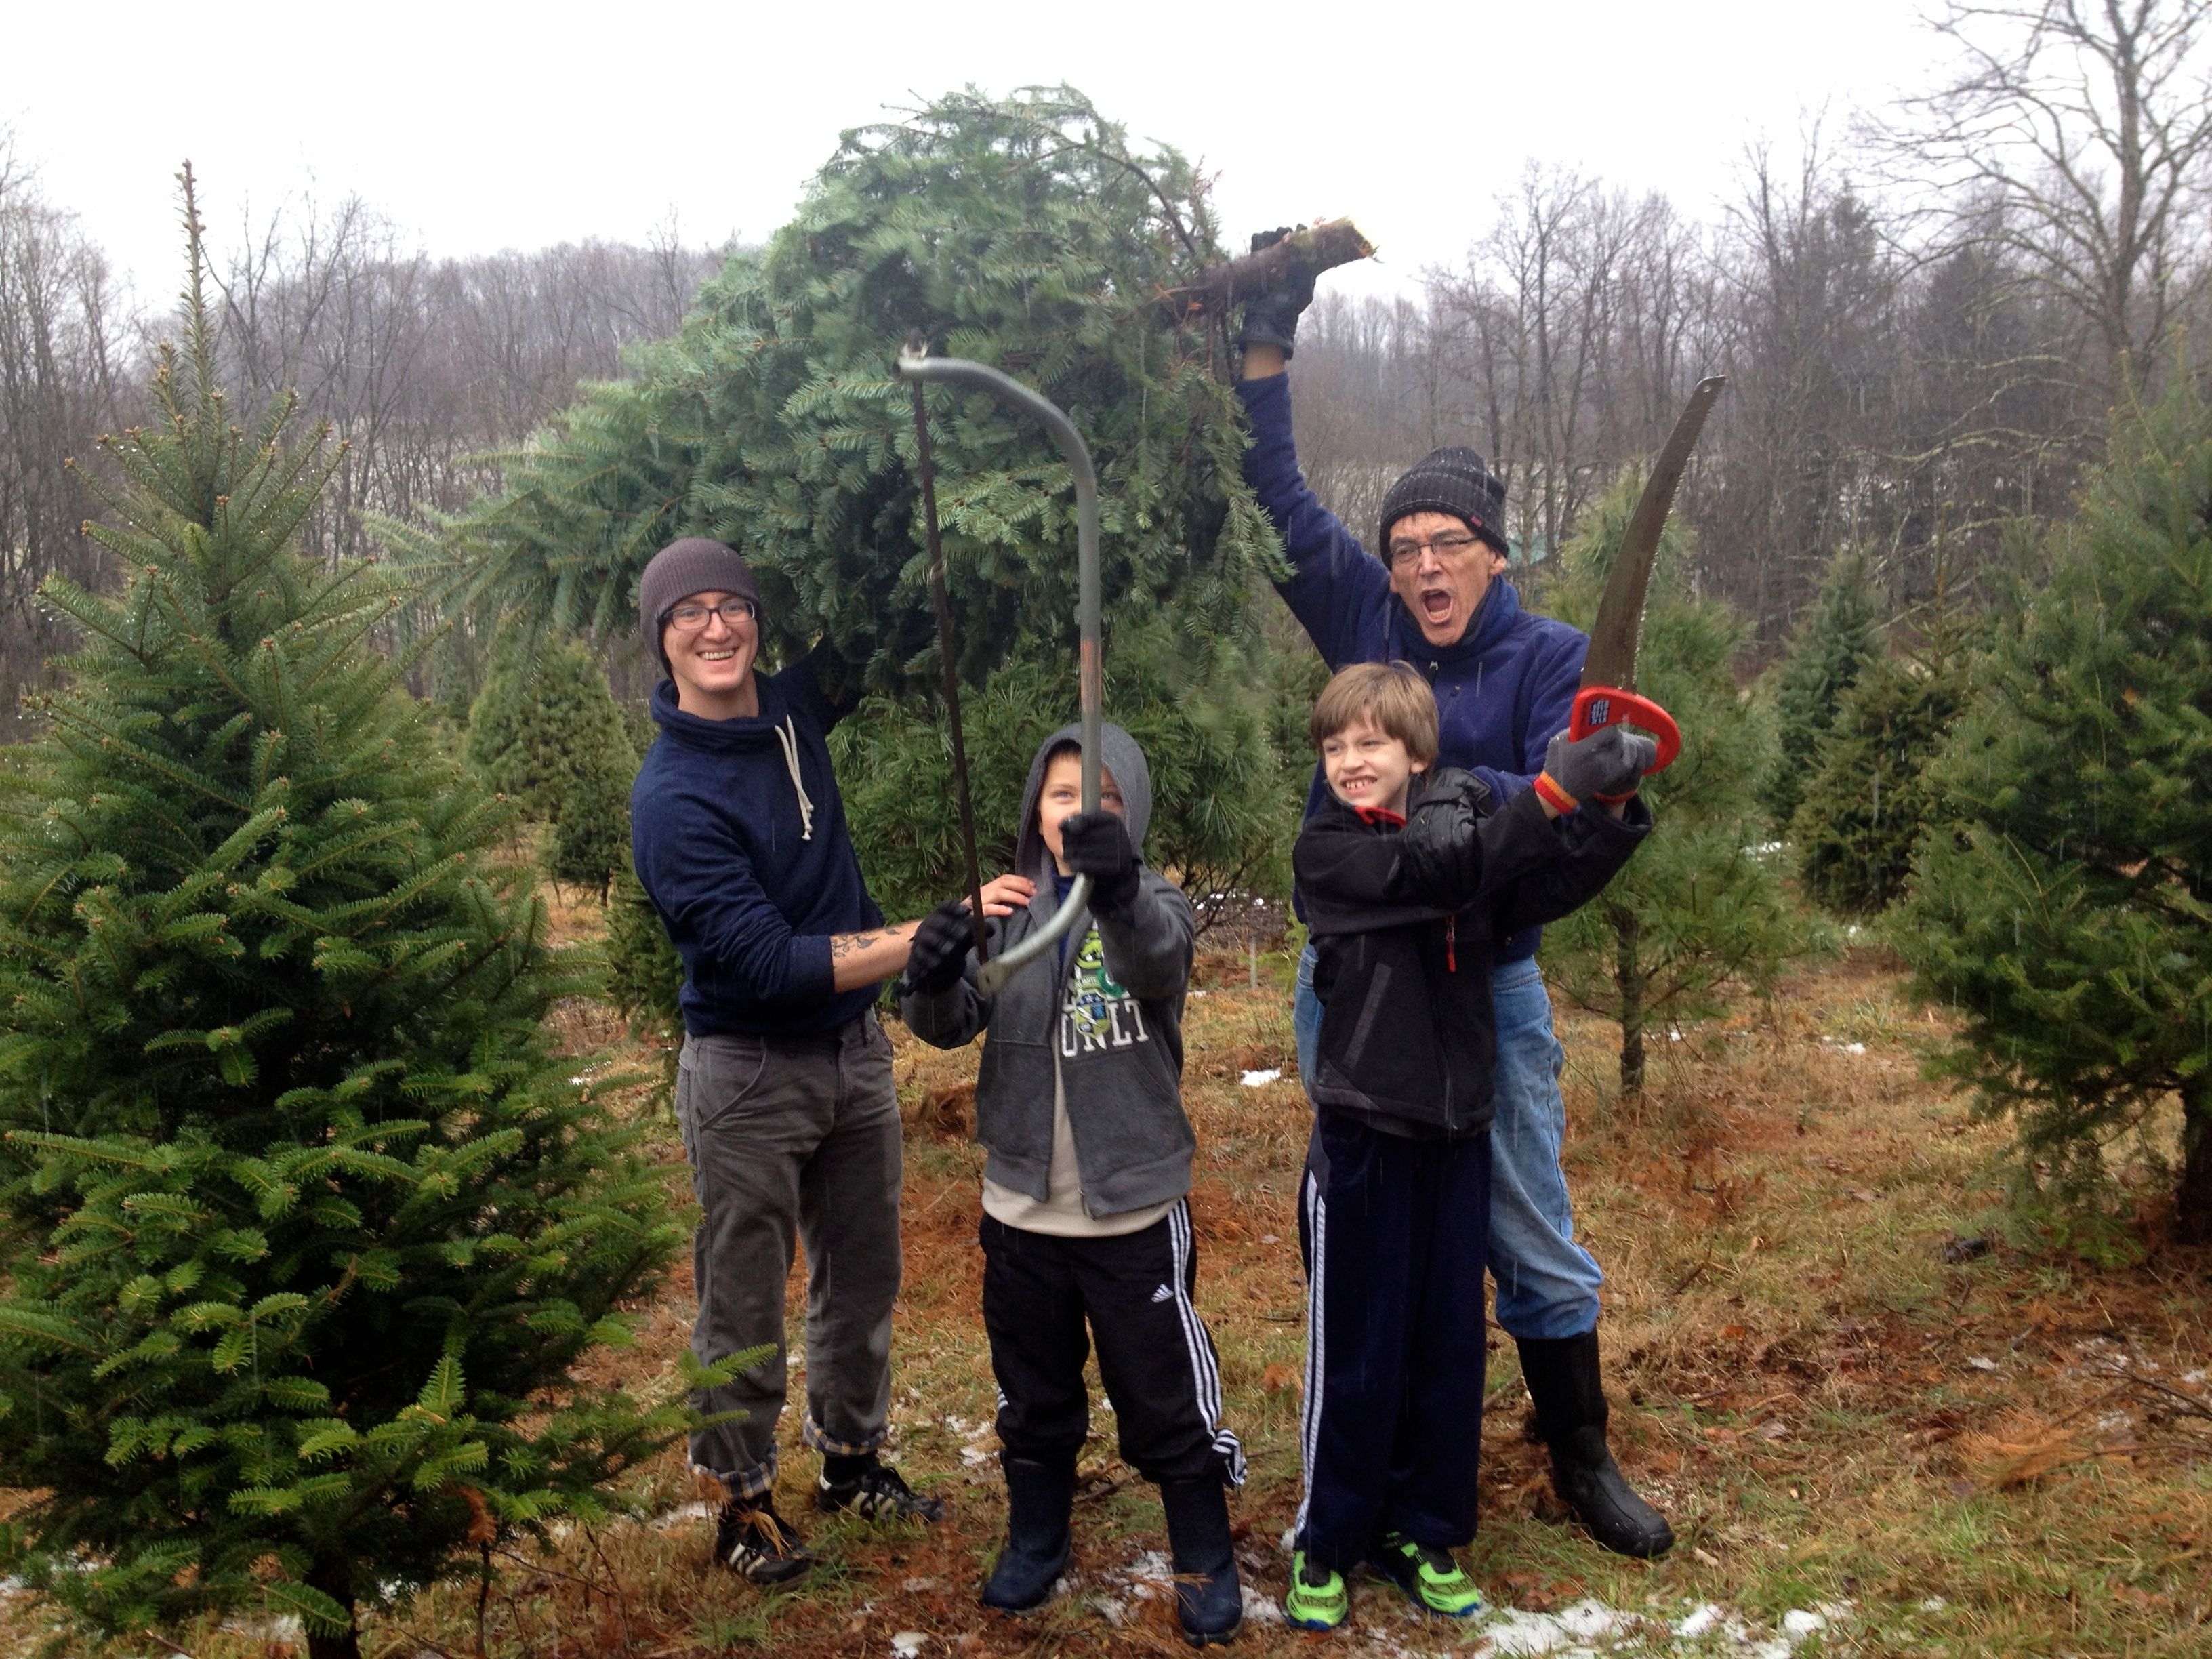 Cutting down a Christmas tree with son-in-law Skyelar Bowmar, Jon Beeson, 9, and Joel Beeson, 7, December, 2013. (Photo courtesy of Joel Beeson)